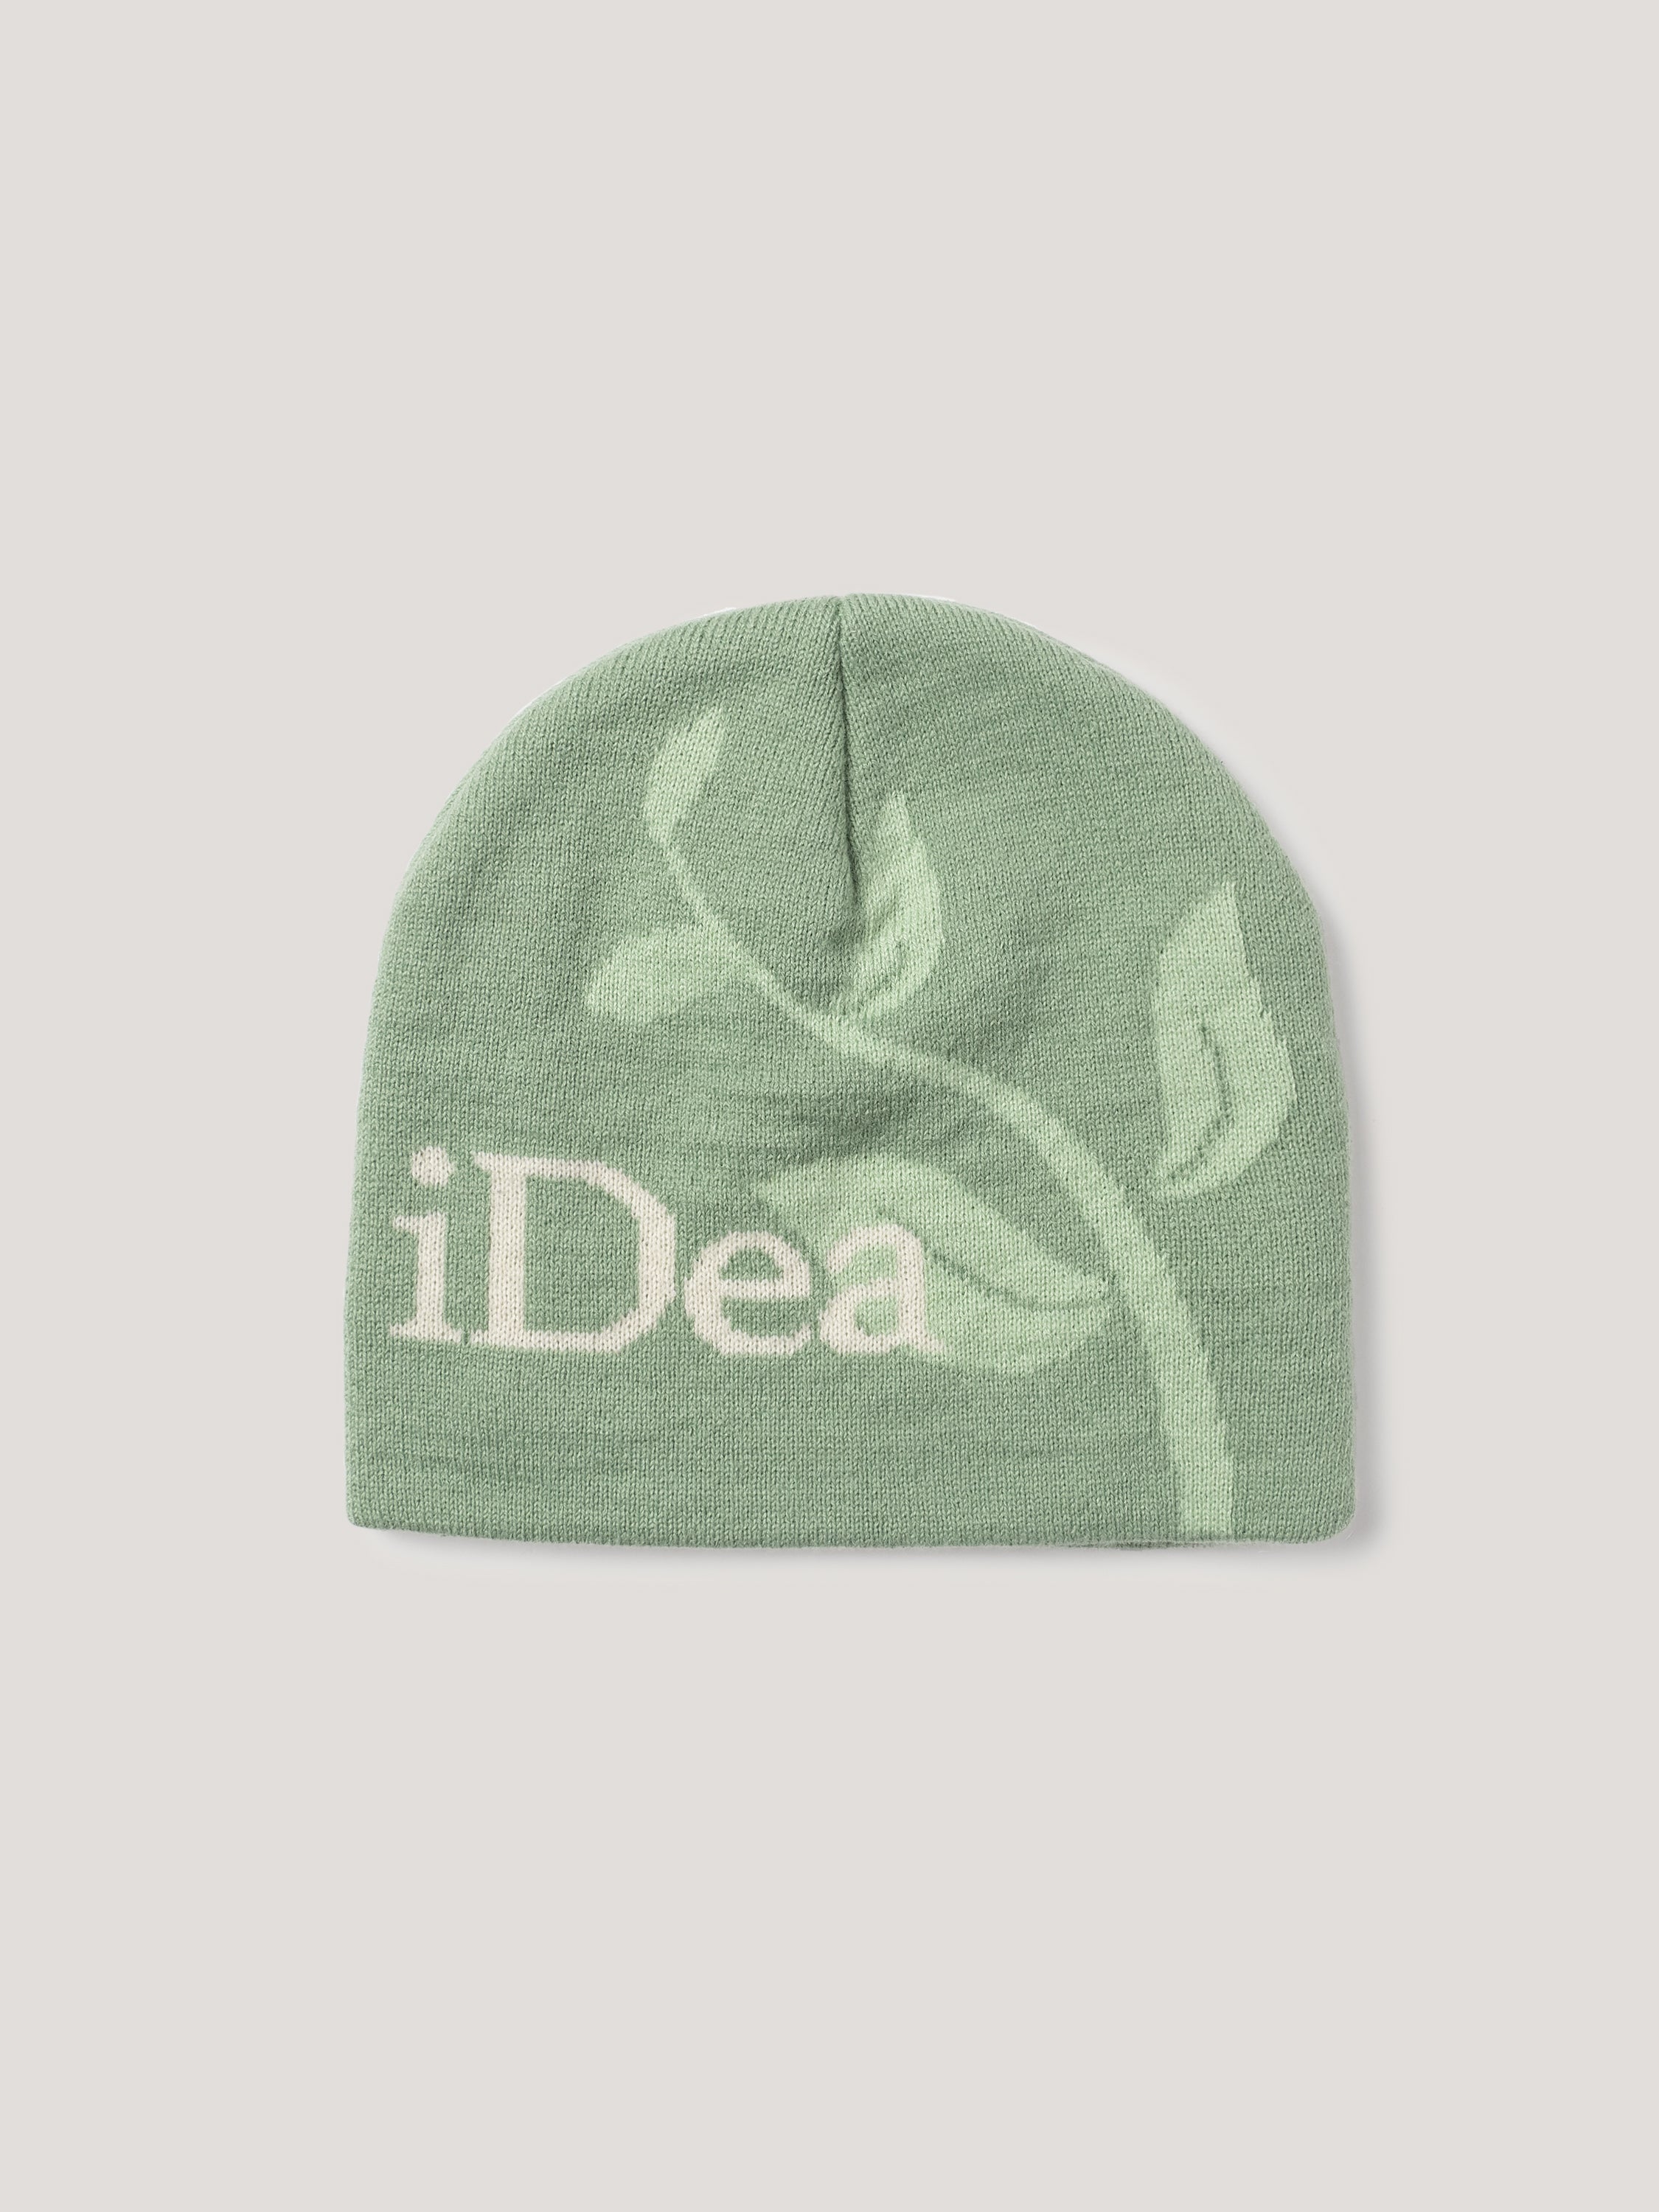 iDea mother of earth beanie (Green)